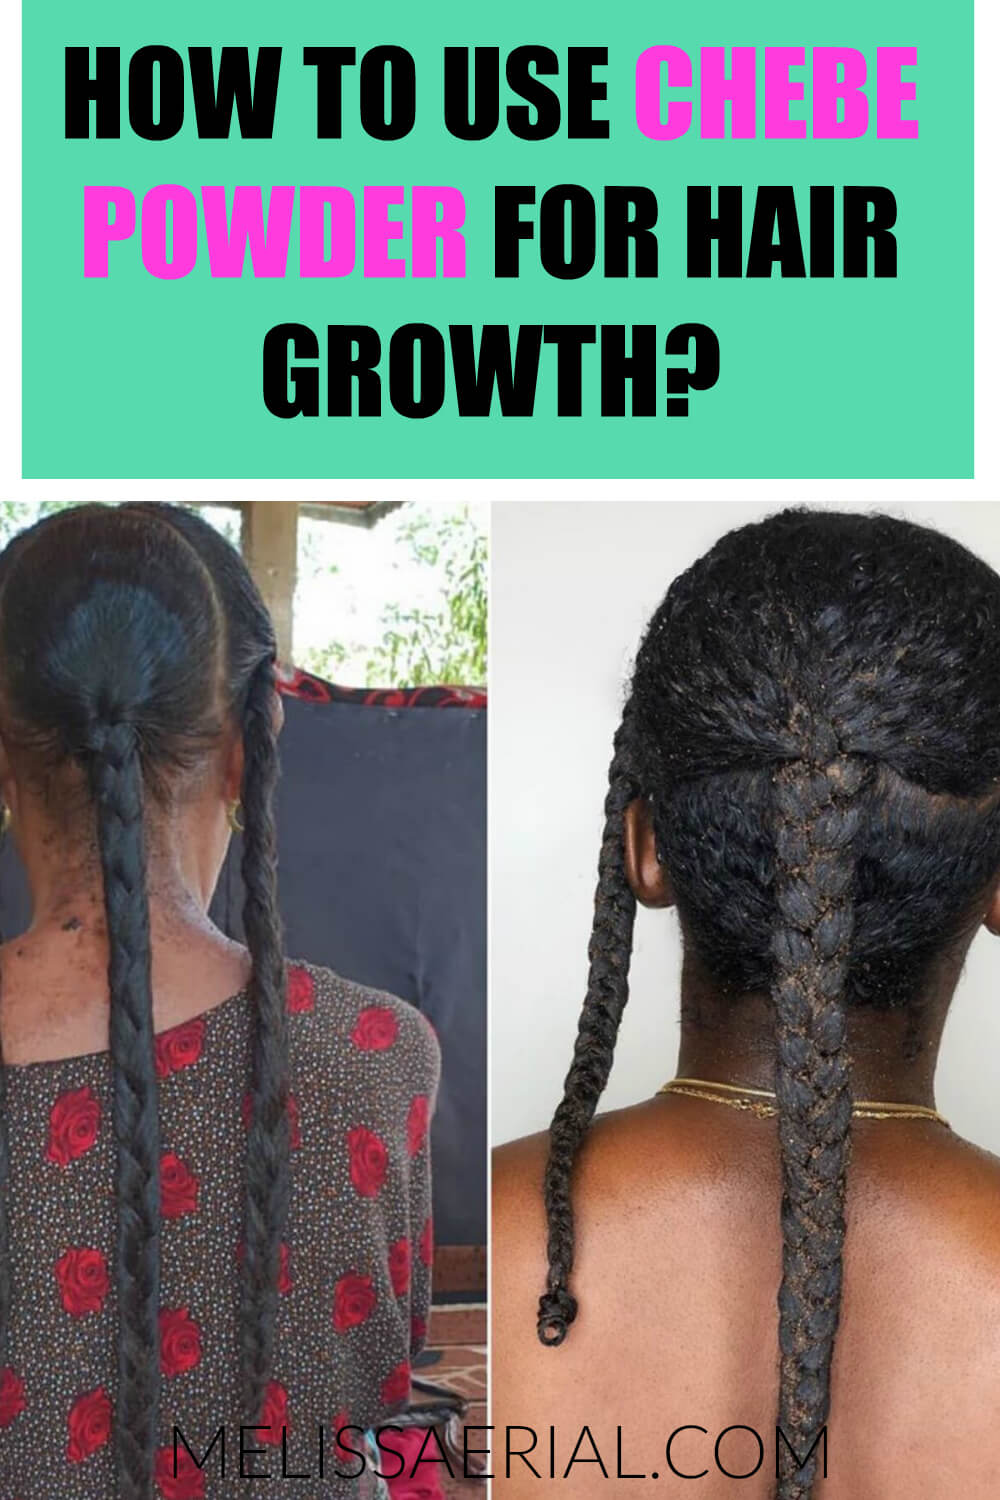 how to use chebe powder for hair growth